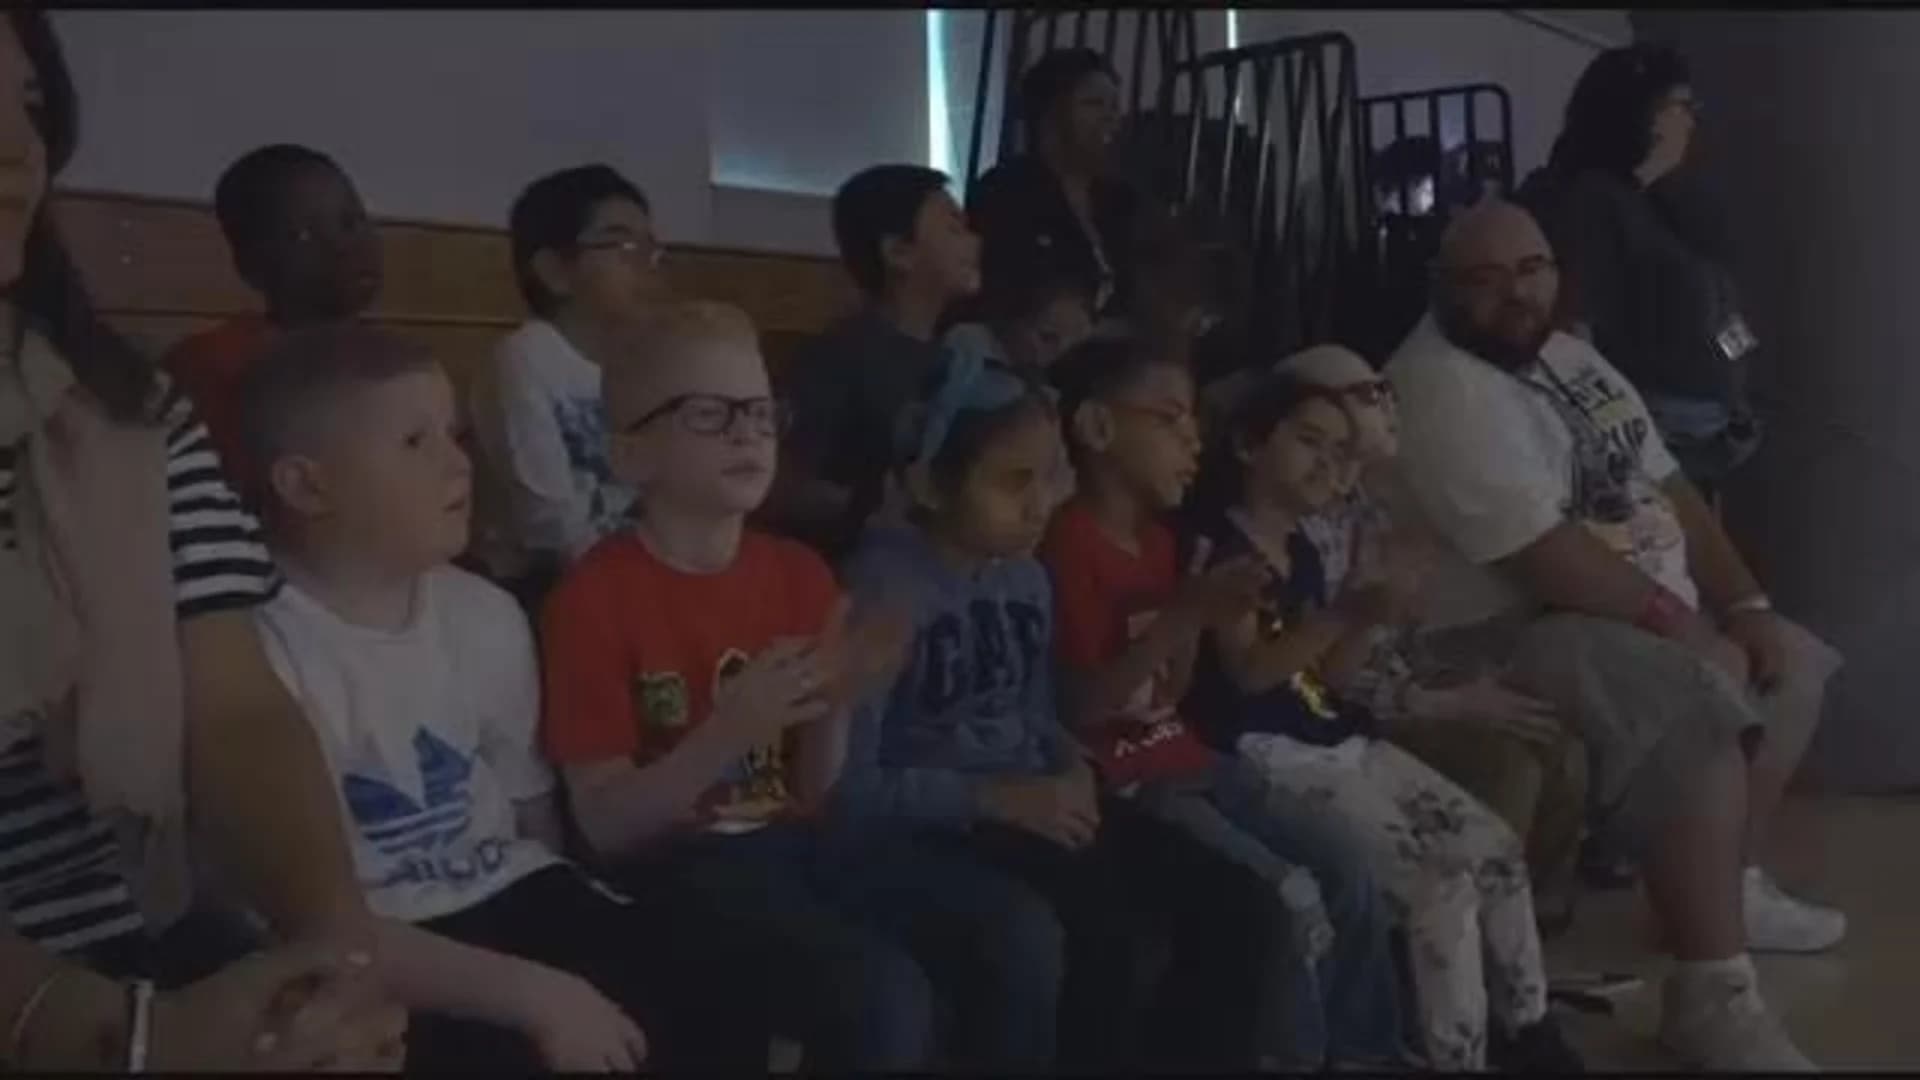 School and local artist host anti-bullying concert